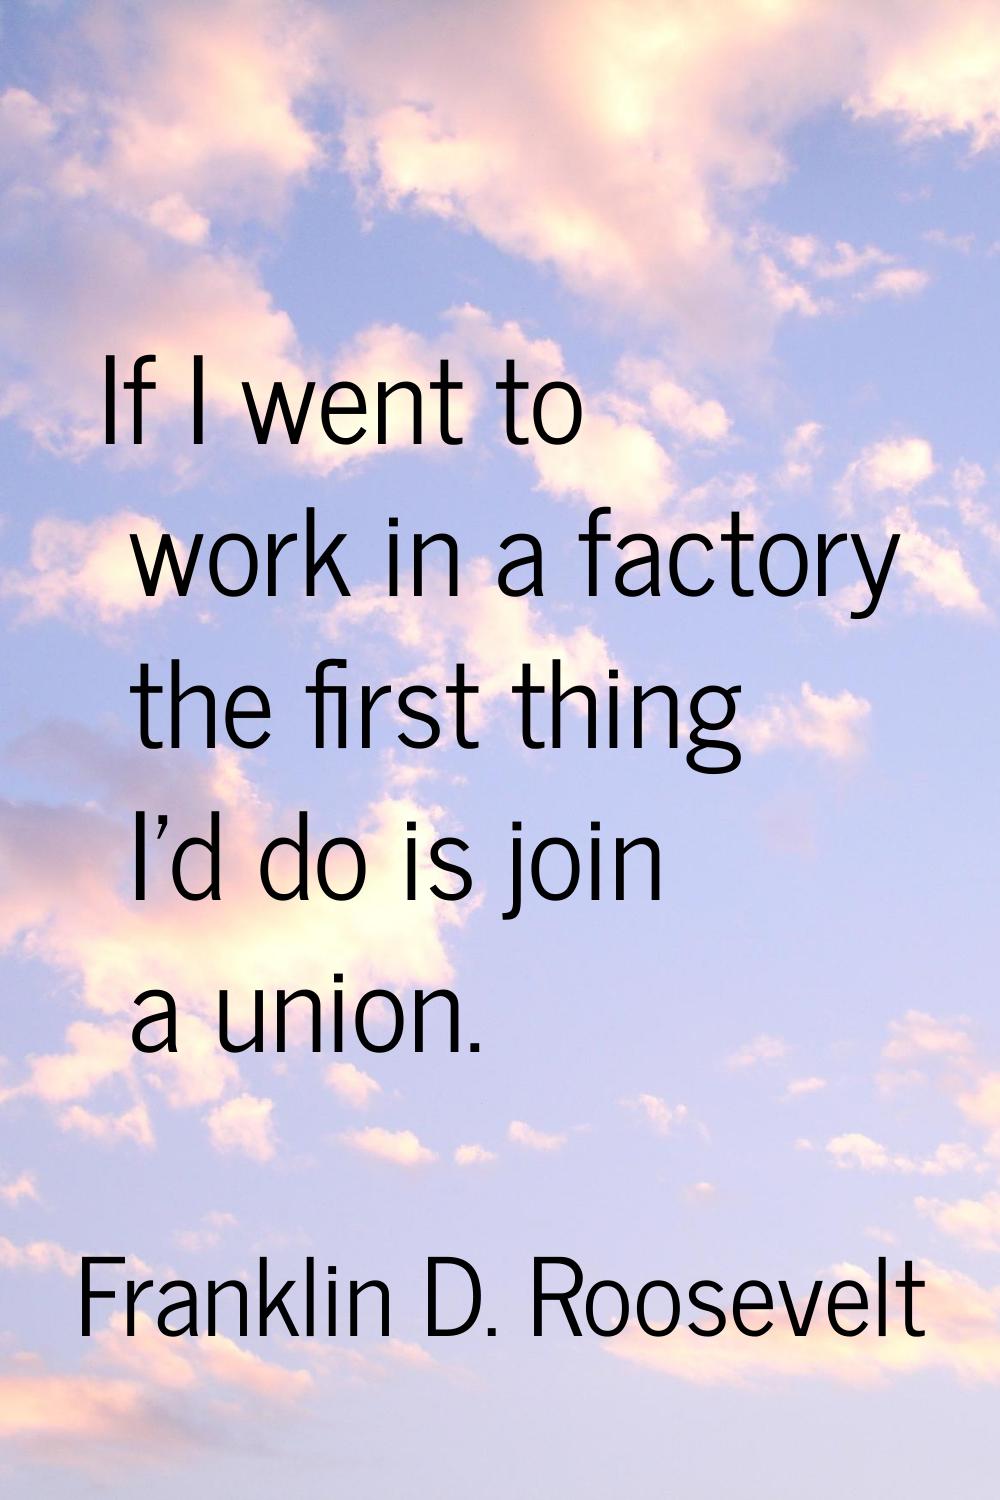 If I went to work in a factory the first thing I'd do is join a union.